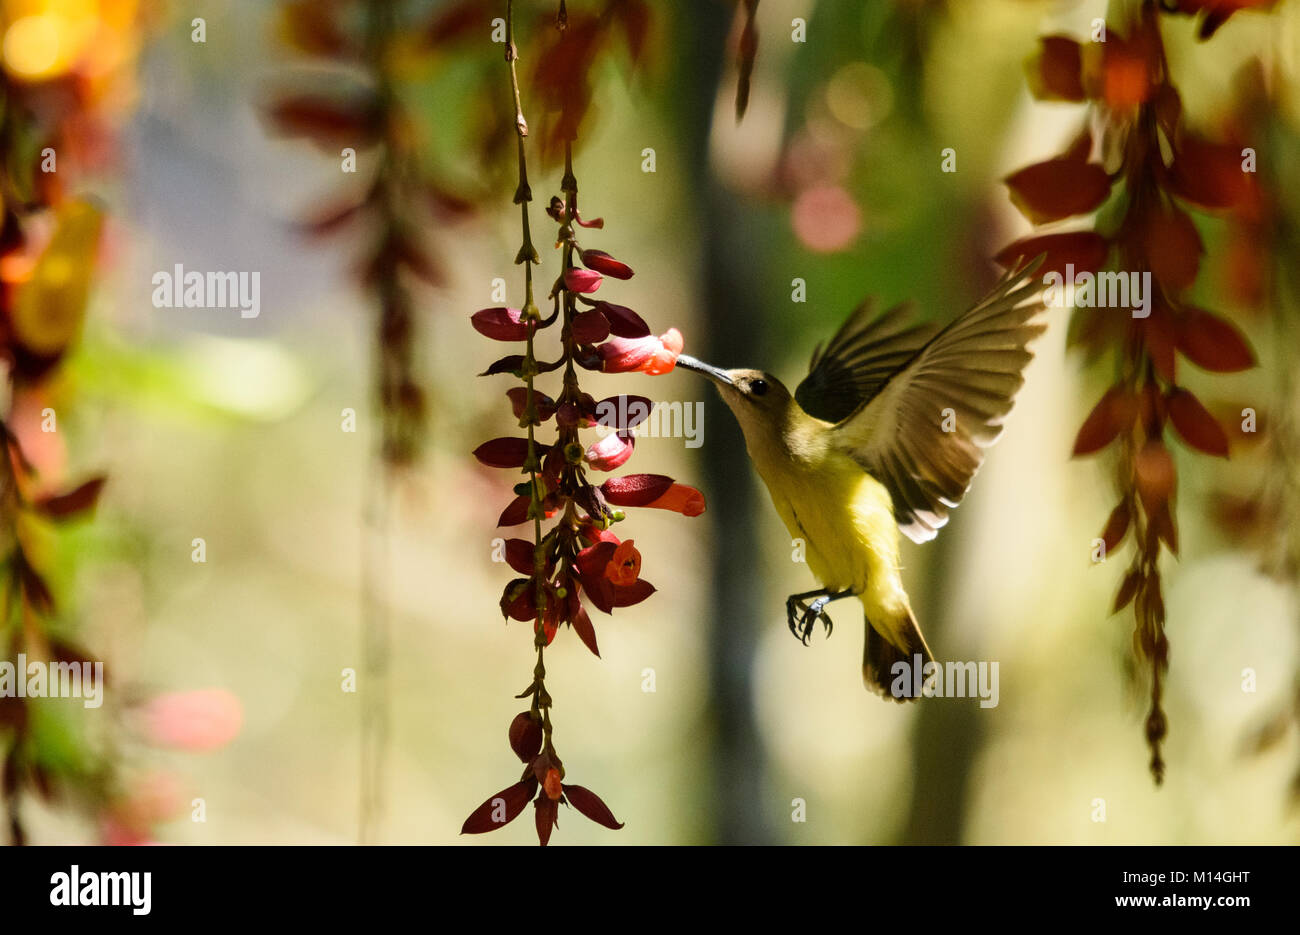 Spider hunter bird hovering and collecting honey from flowers. Stock Photo